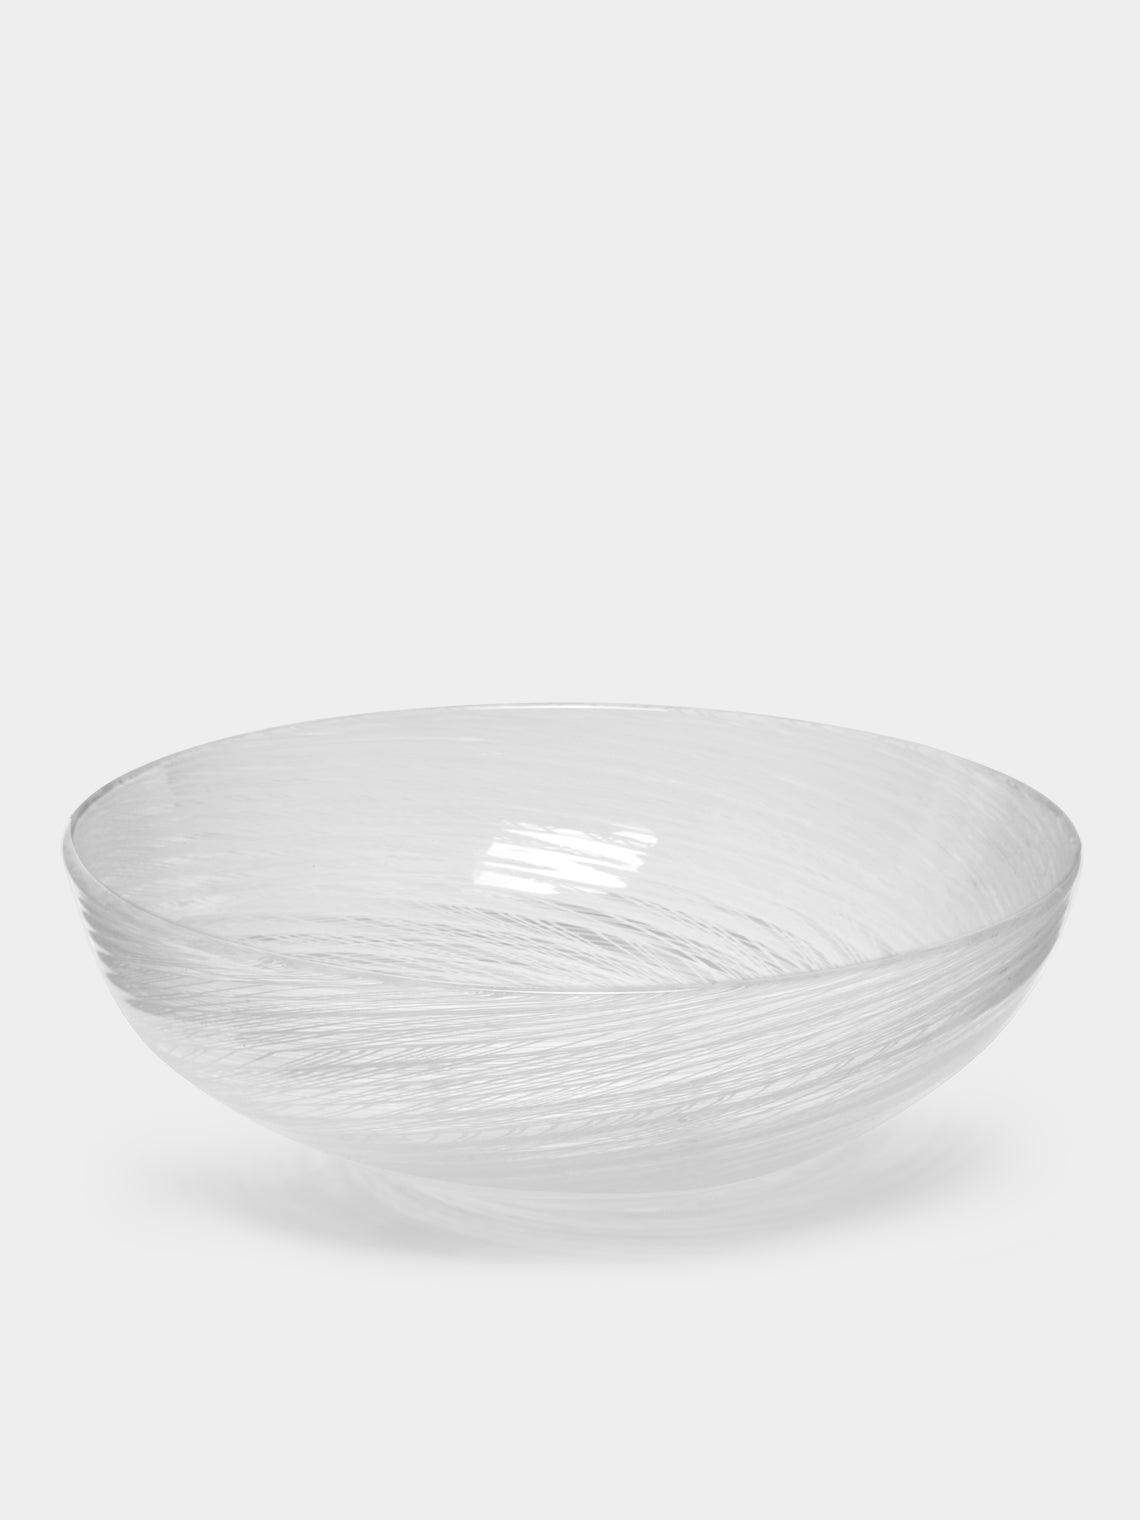 Antique and Vintage - Mid-Century Venini Murano Glass Bowl -  - ABASK - 